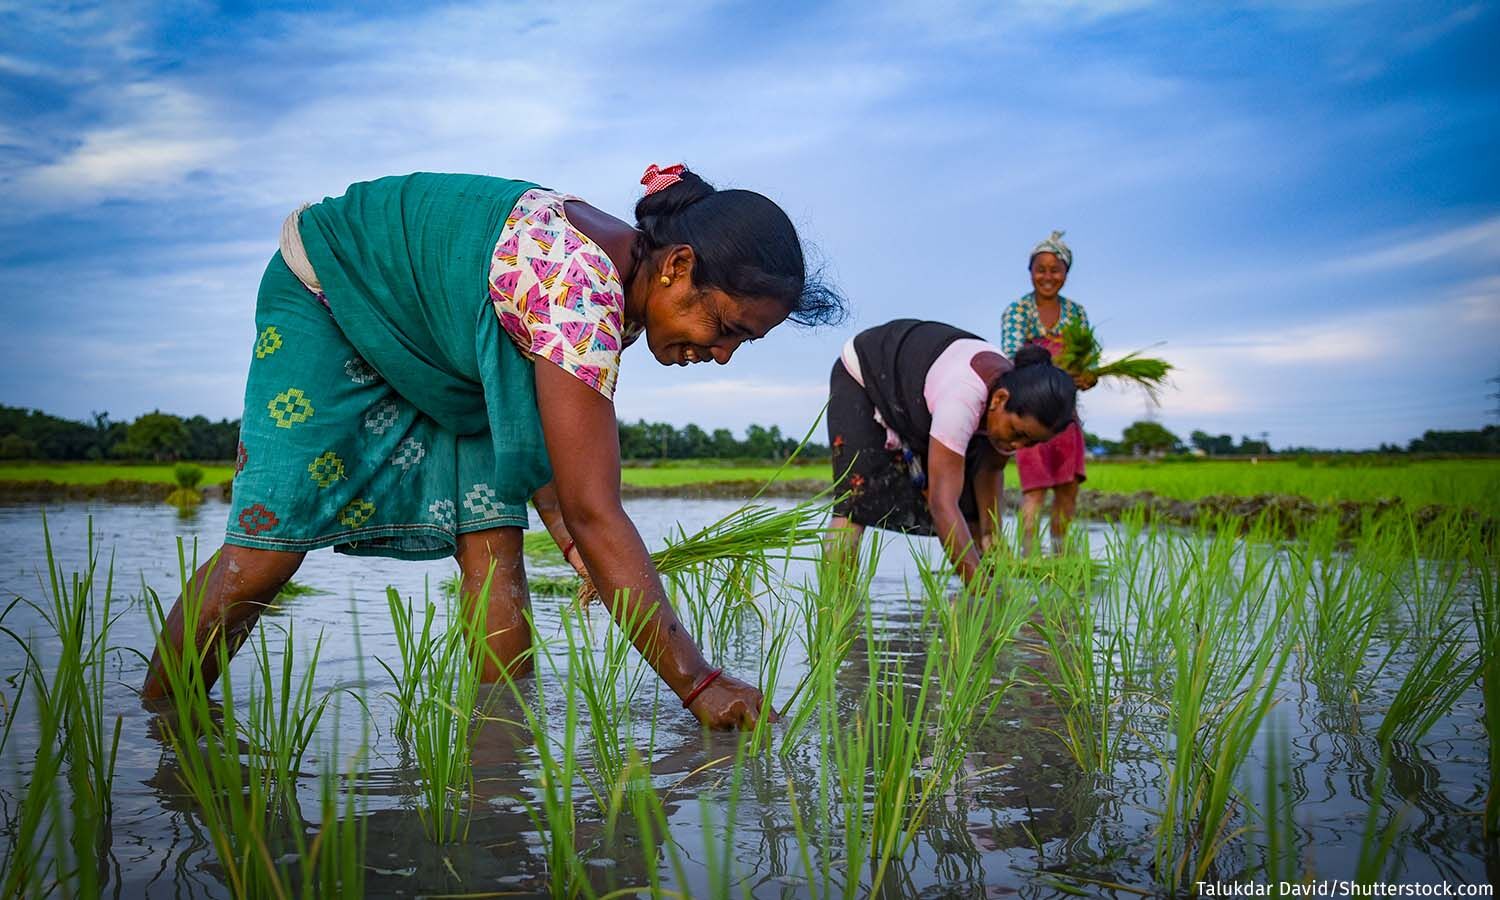 a woman bending over in a marsh area grabbing something from the water, she is up to her ankles and wearing a brightly colored traditional outfit in blue, green, white and purple